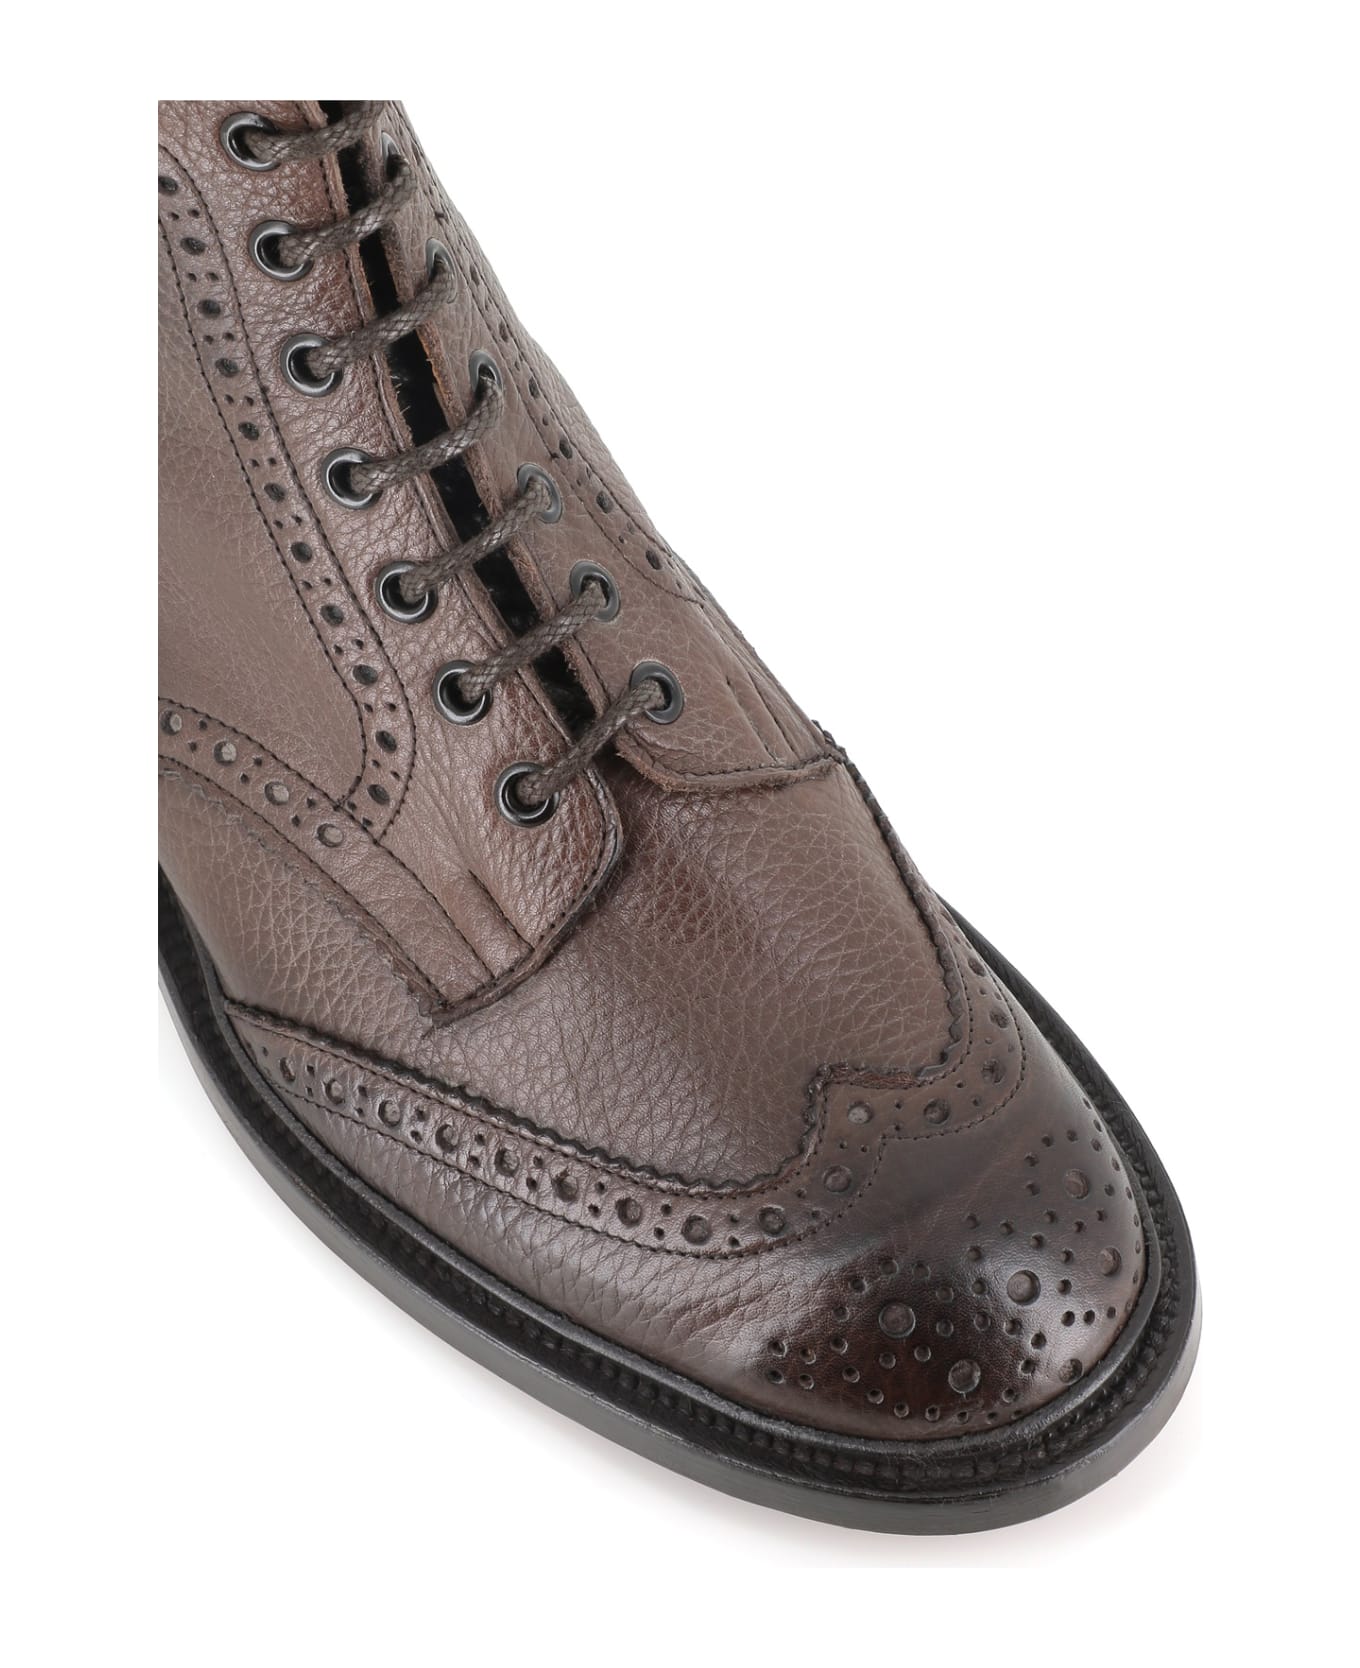 Tricker's Stow Country Boot - Dark brown ブーツ